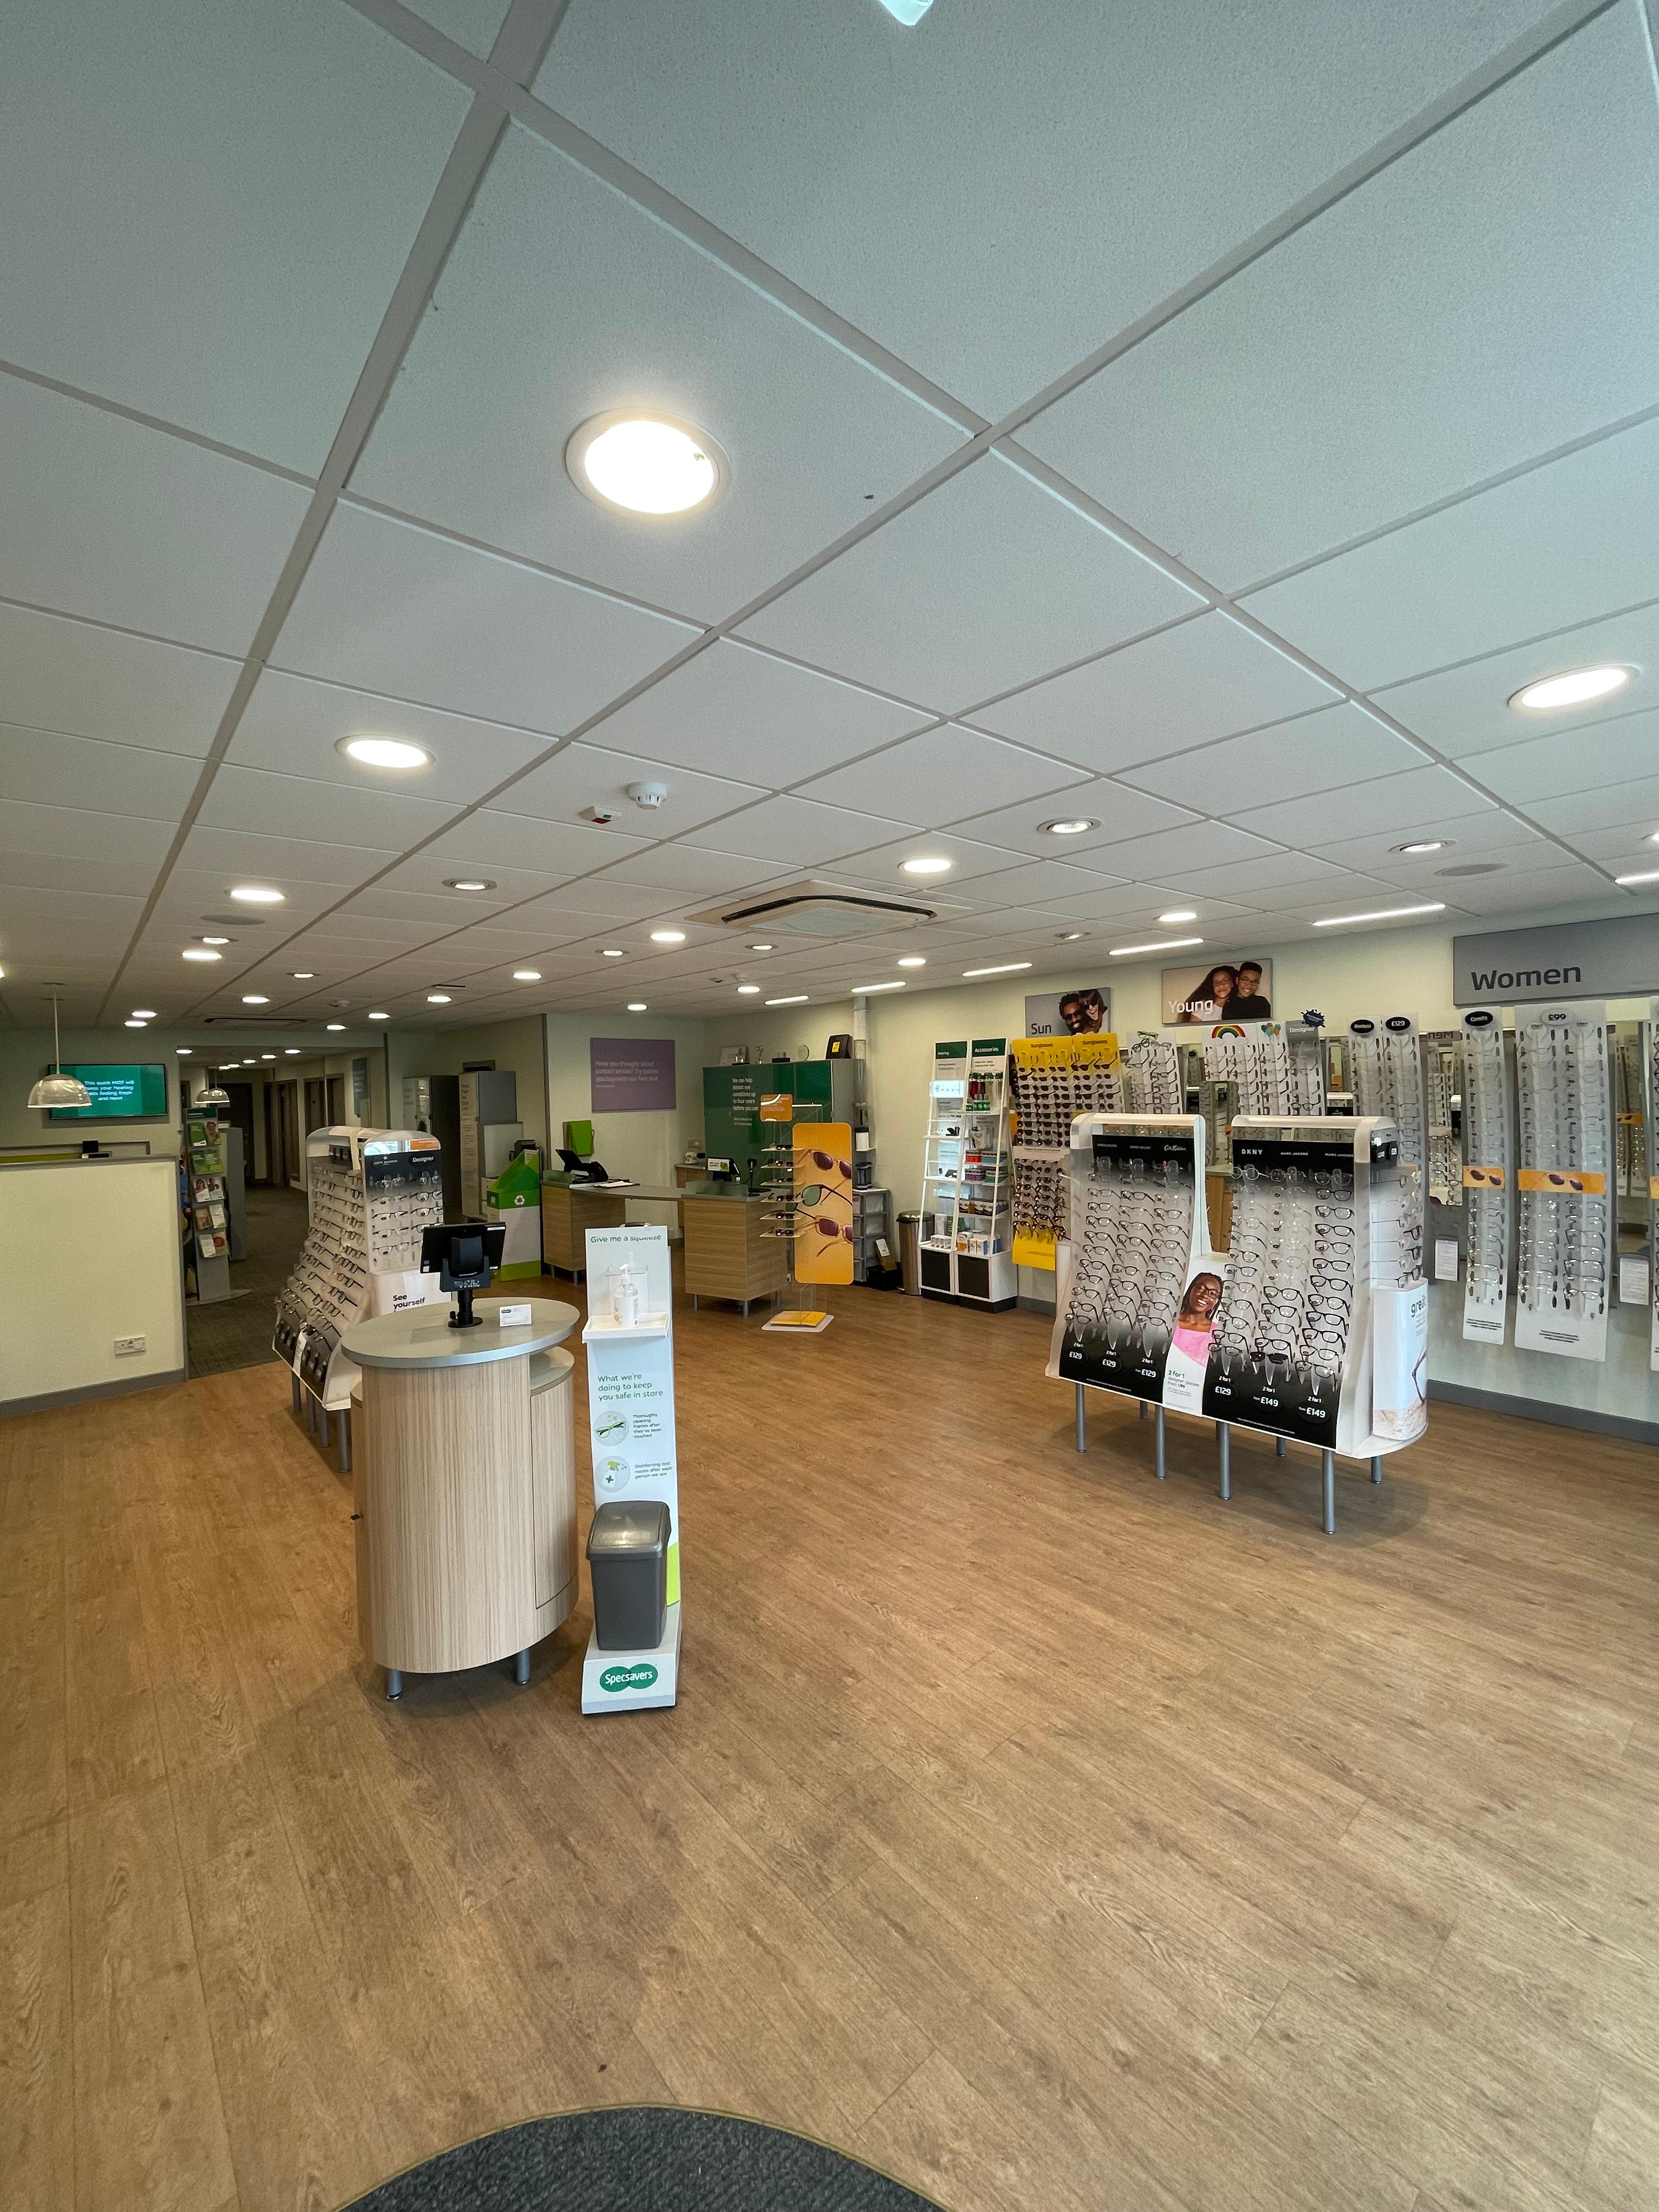 Images Specsavers Opticians and Audiologists - Lanark